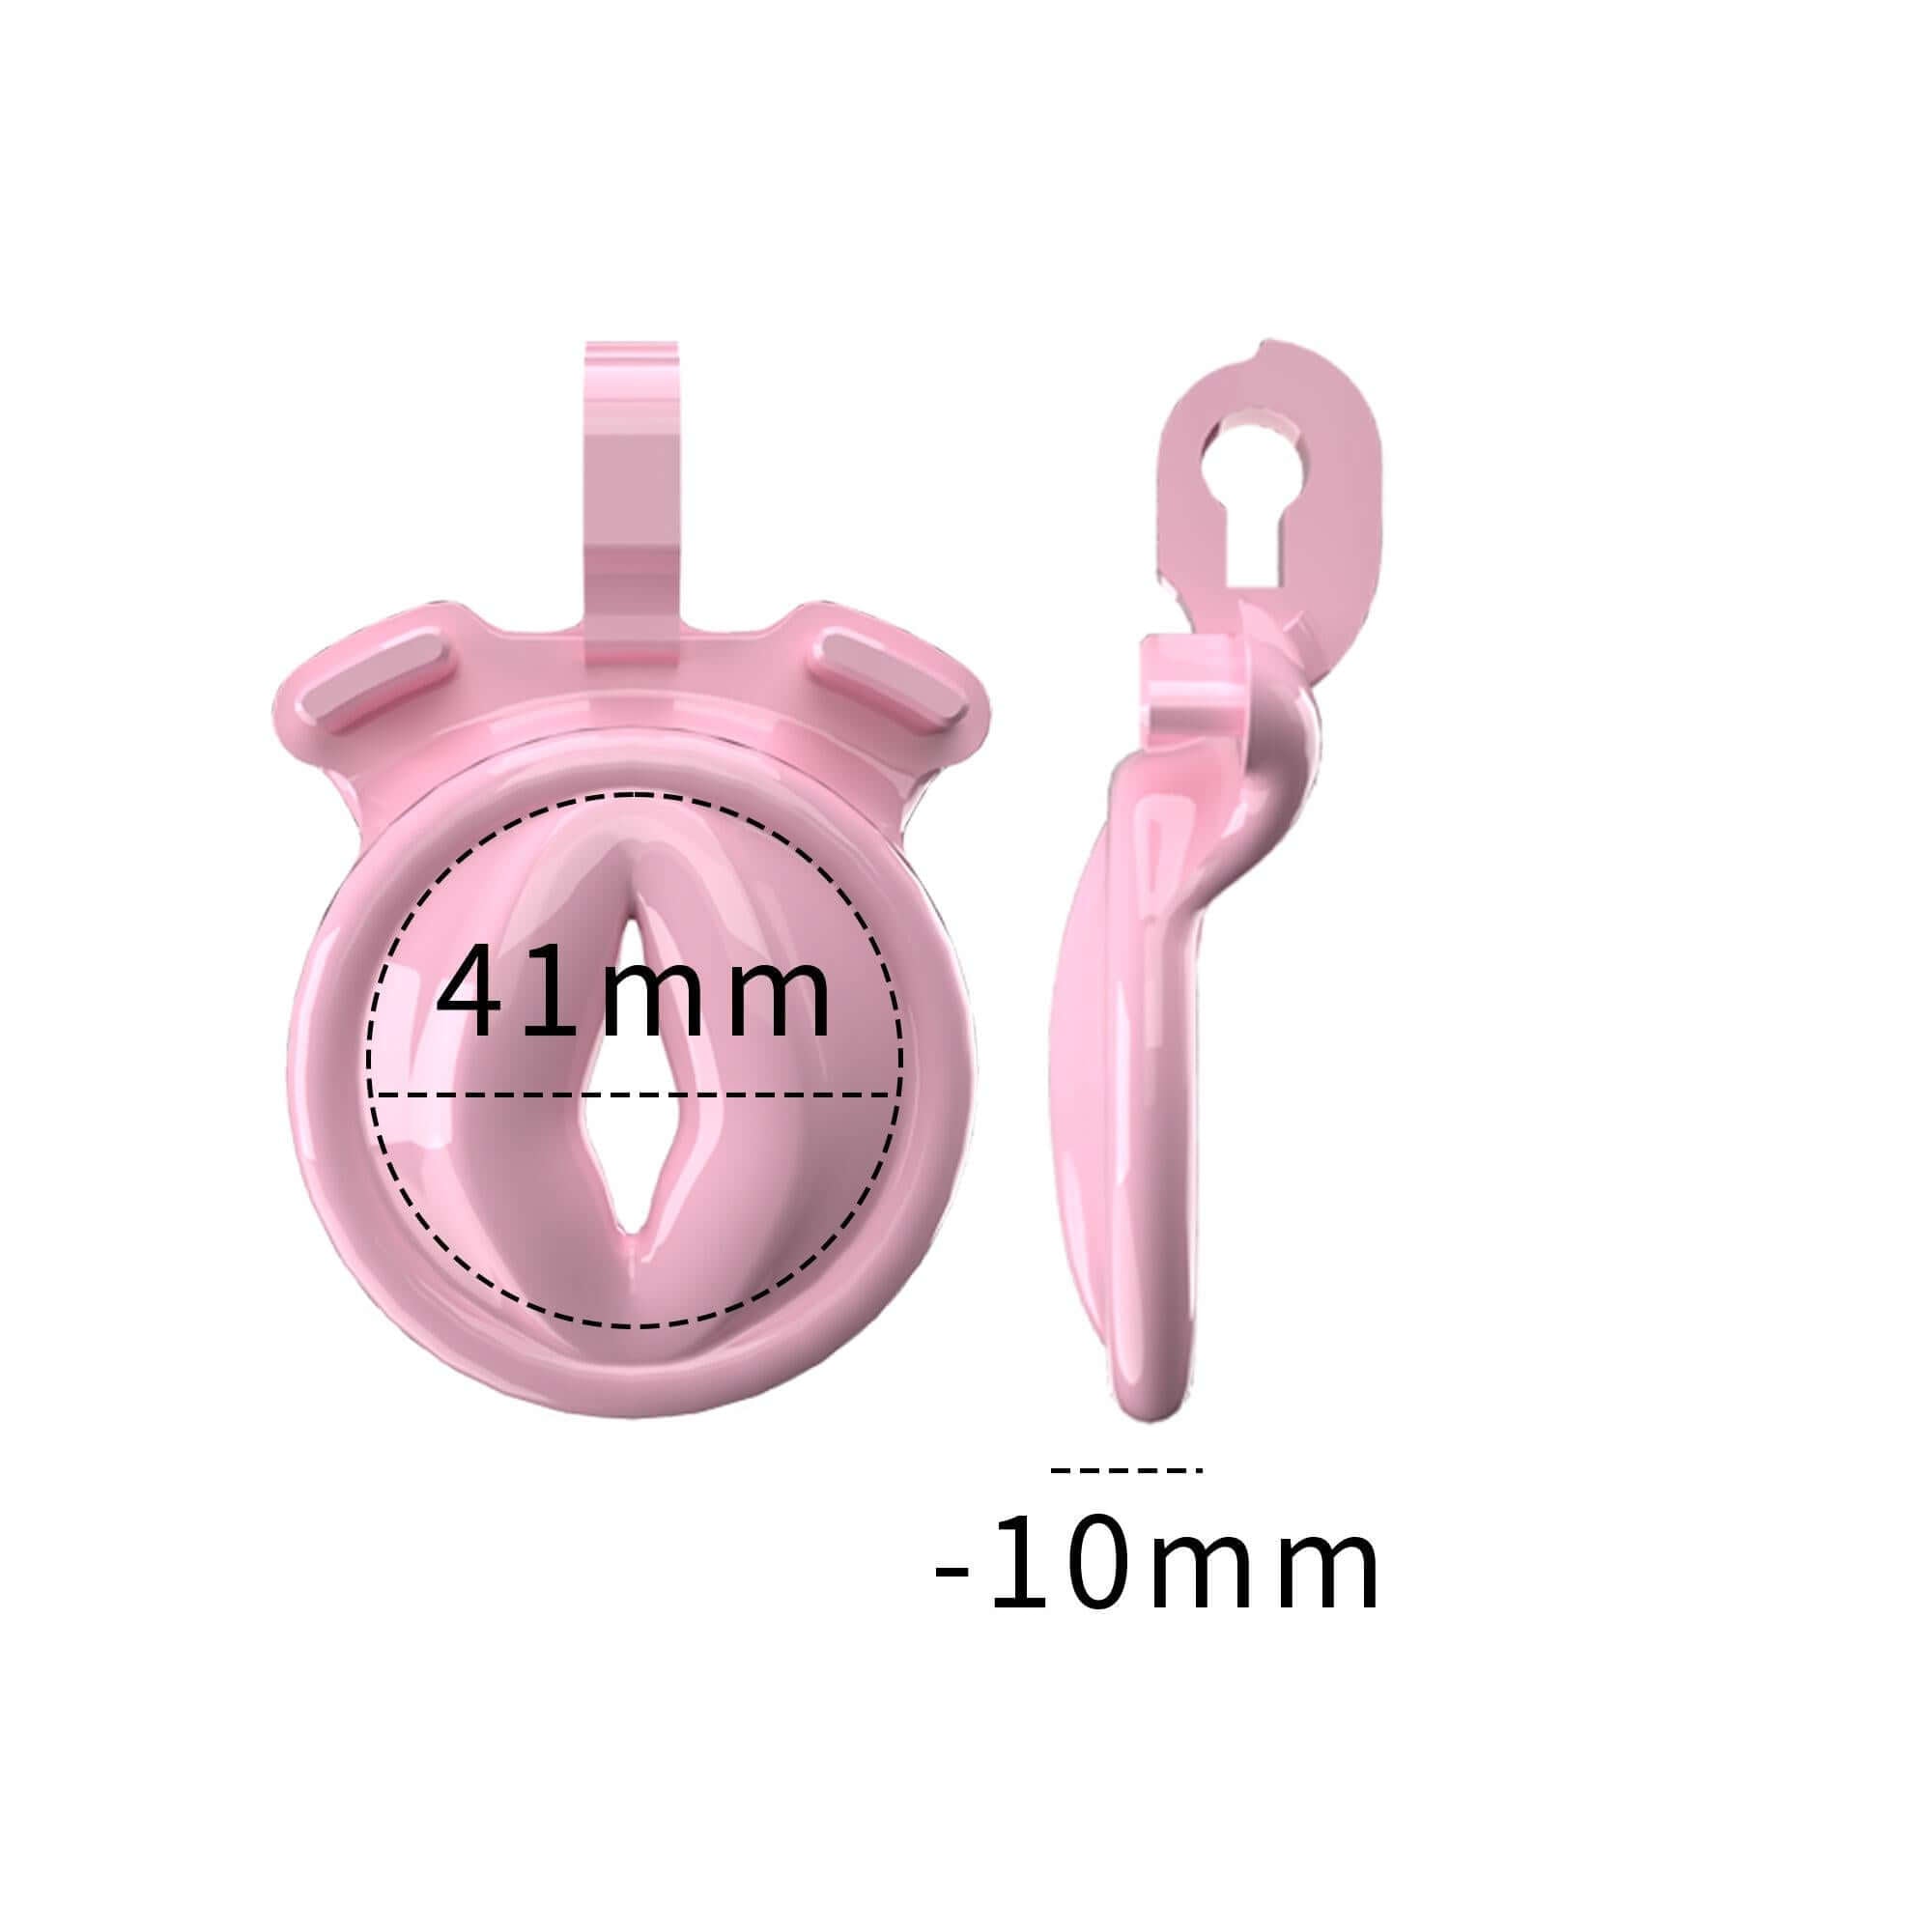 Pink Resin Slit Cock Cage